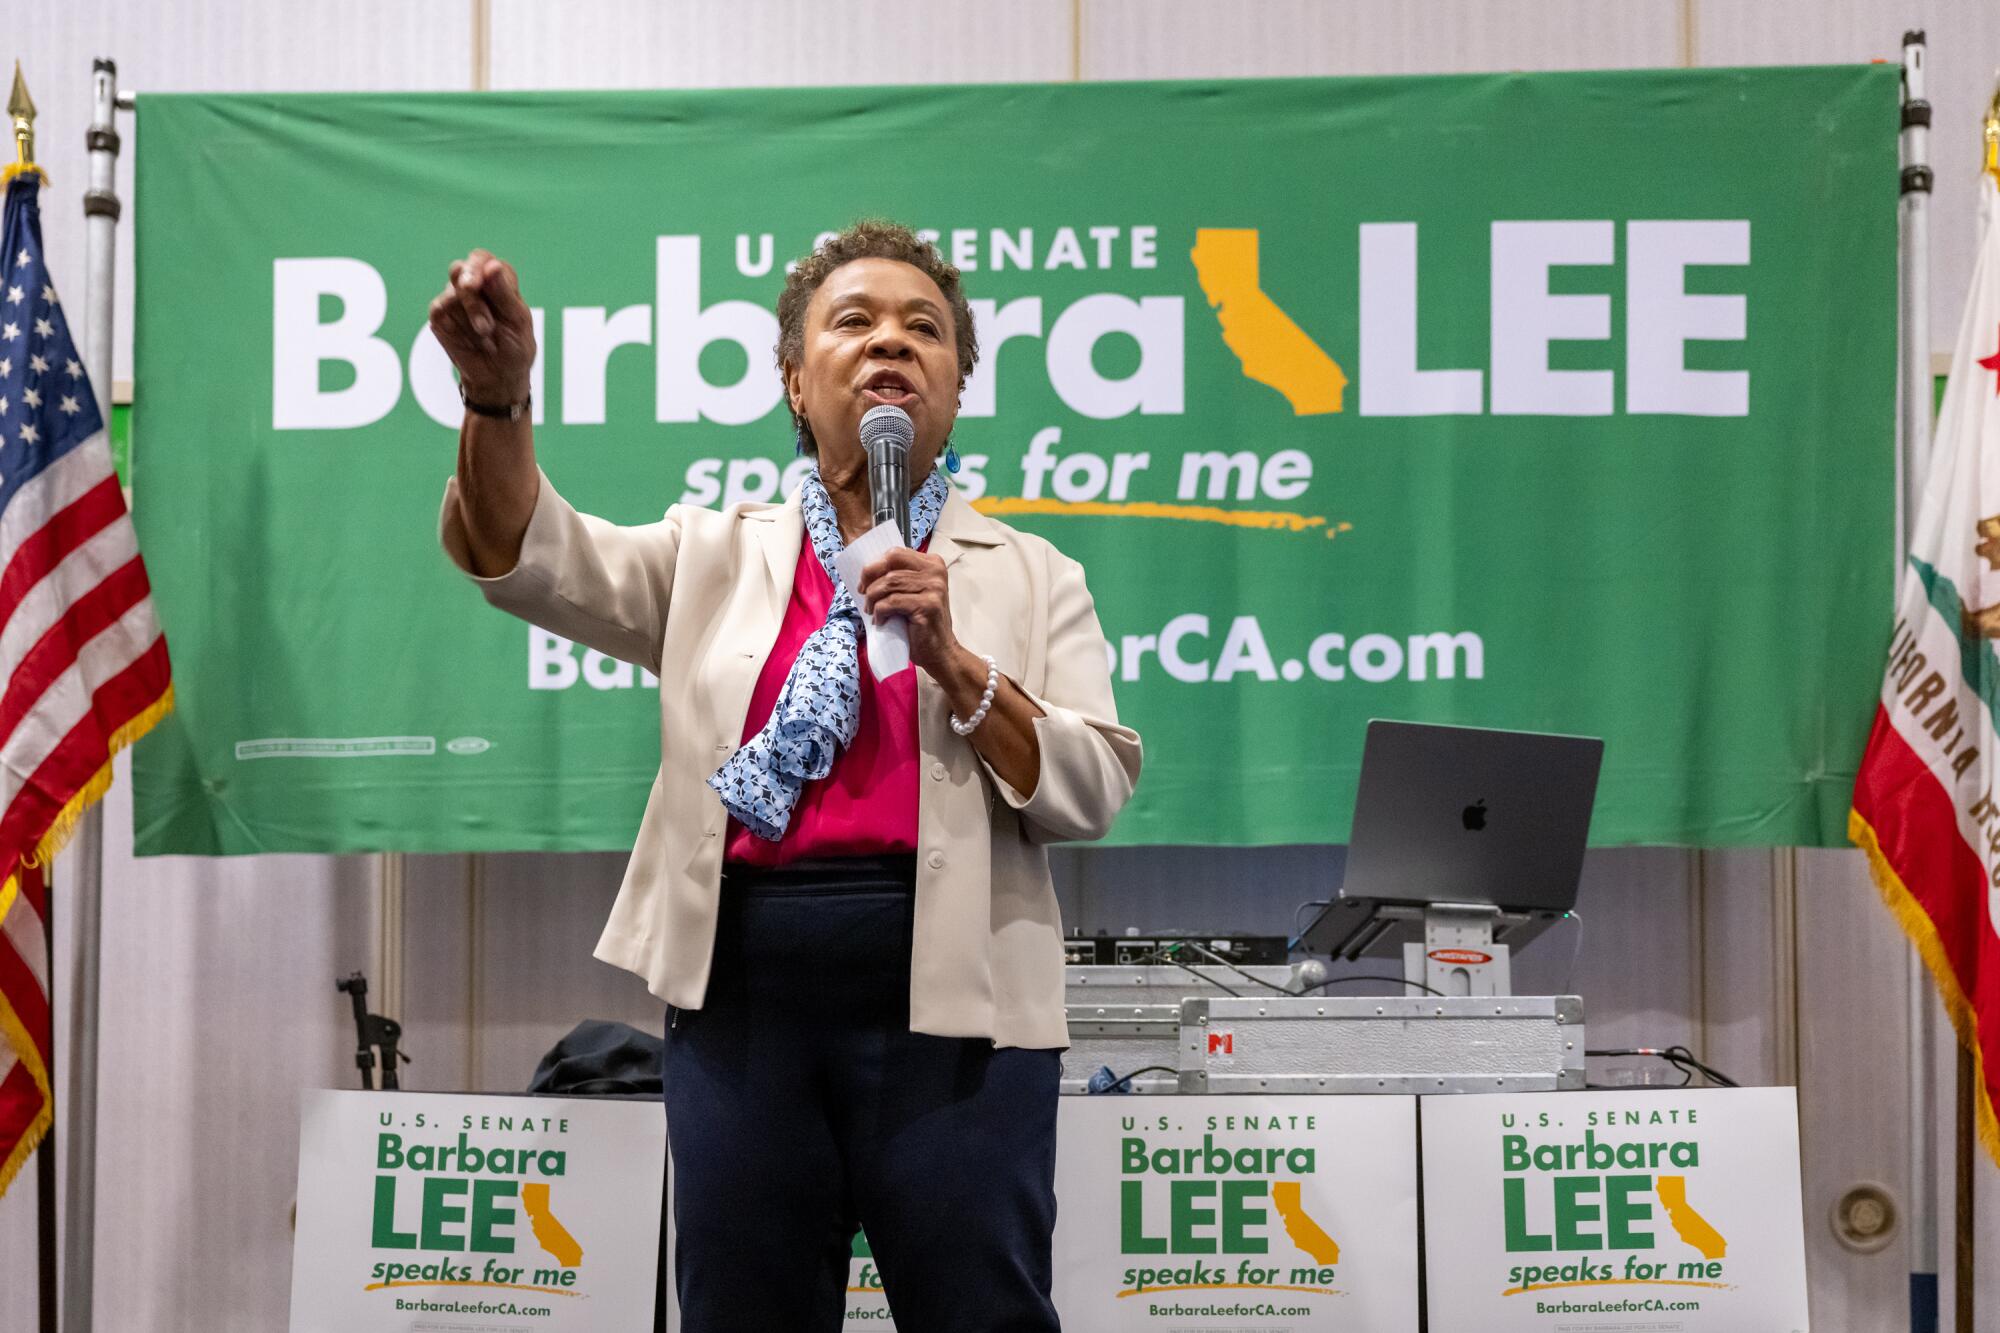 Rep. Barbara Lee gestures as she stands in front of a banner and signs for her Senate campaign, speaking into a microphone.